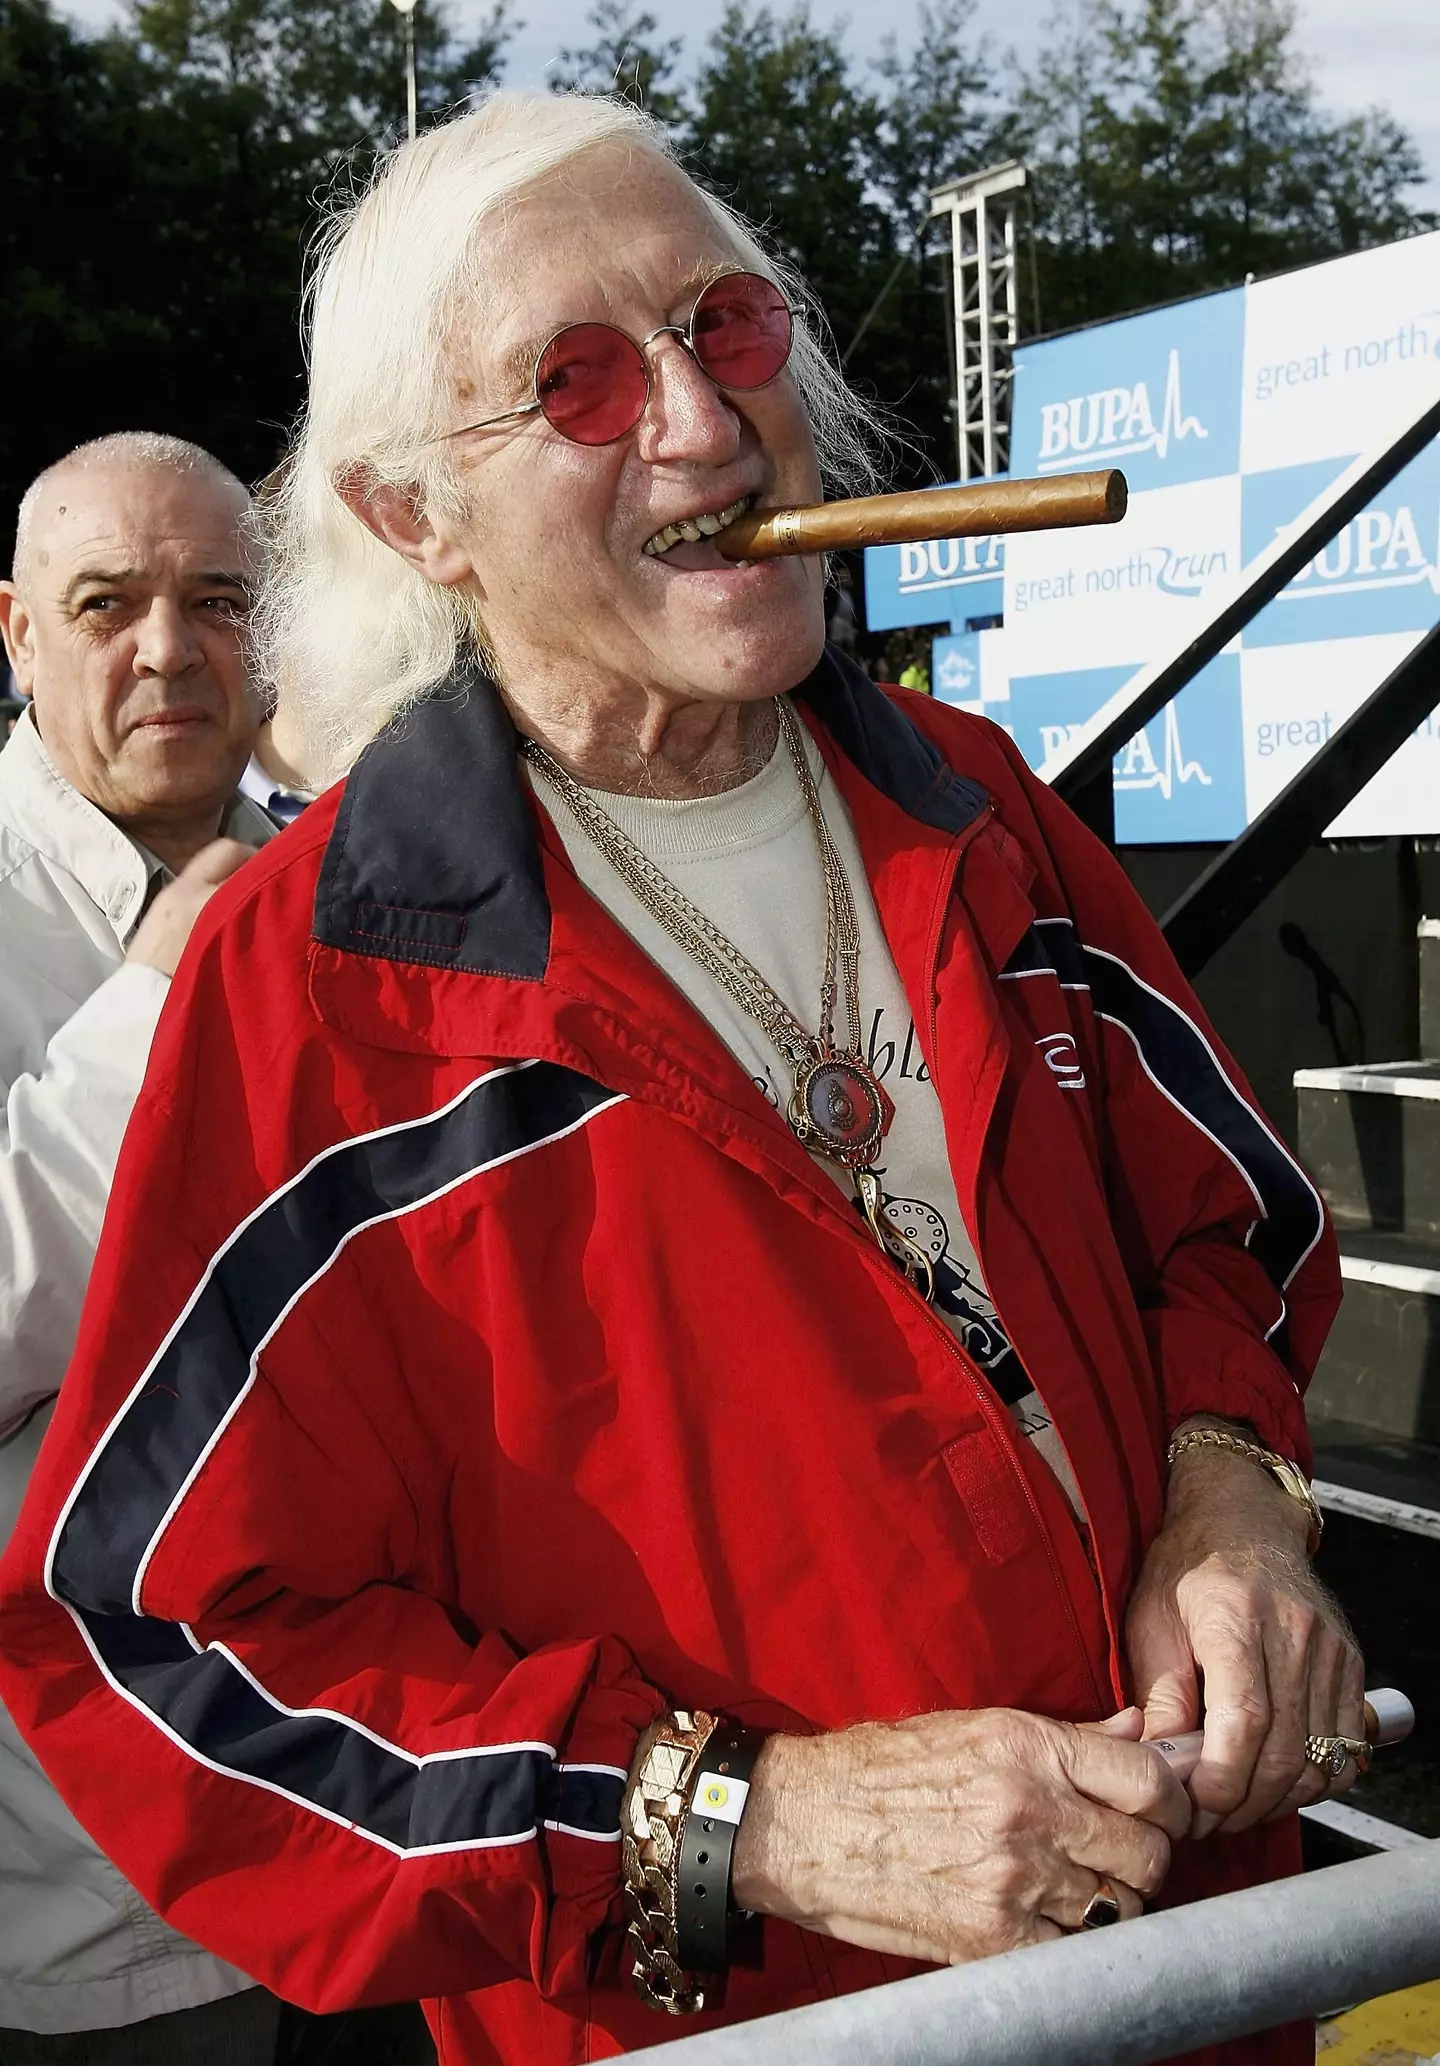 Jimmy Savile died in 2011 at the age of 84, before his horrific crimes came to light.